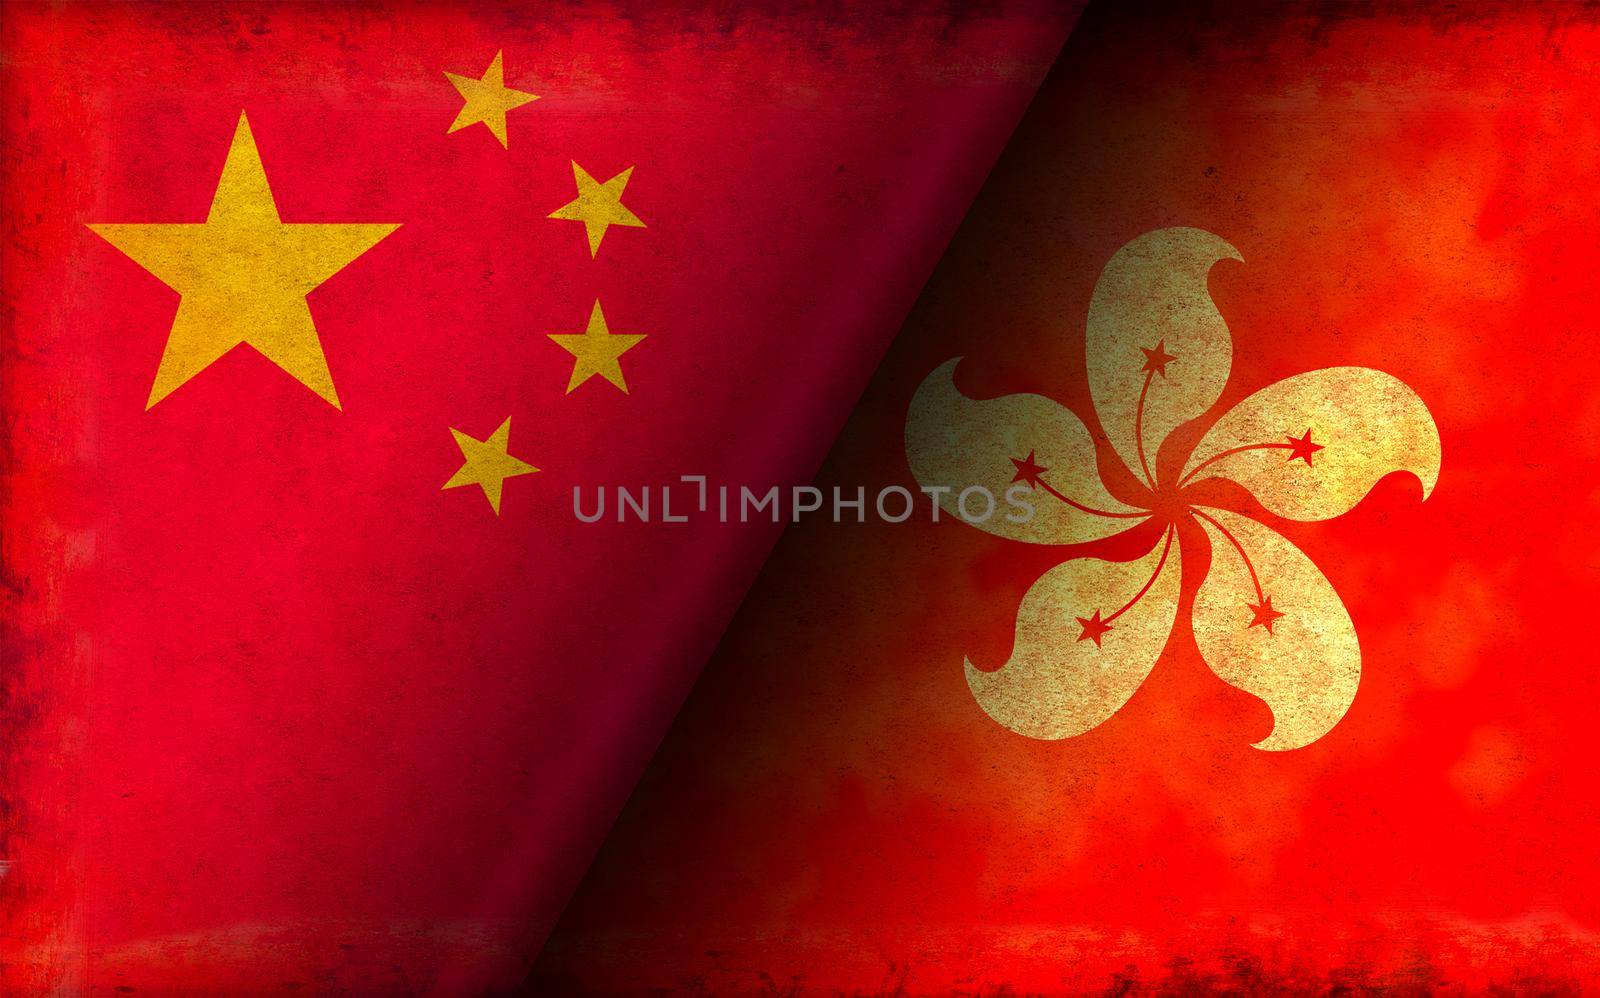 Grunge country flag illustration / China vs Hong Kong (Political or economic conflict) by barks